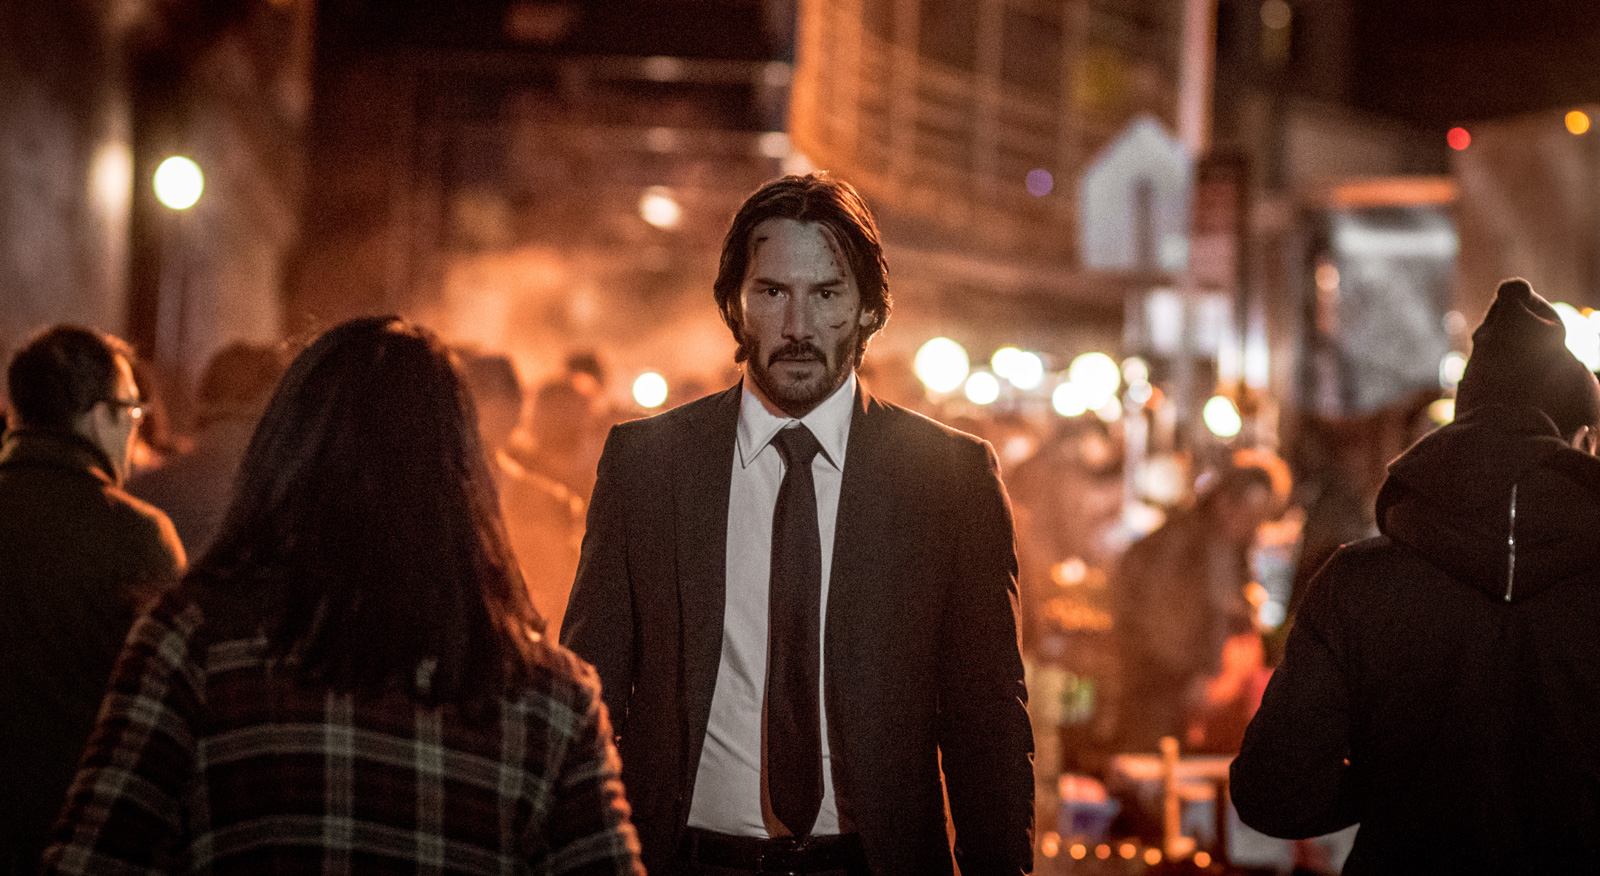 John Wick Chapter 2 Movie Images - Keanu Reeves Laurence Fishburne1600 x 876